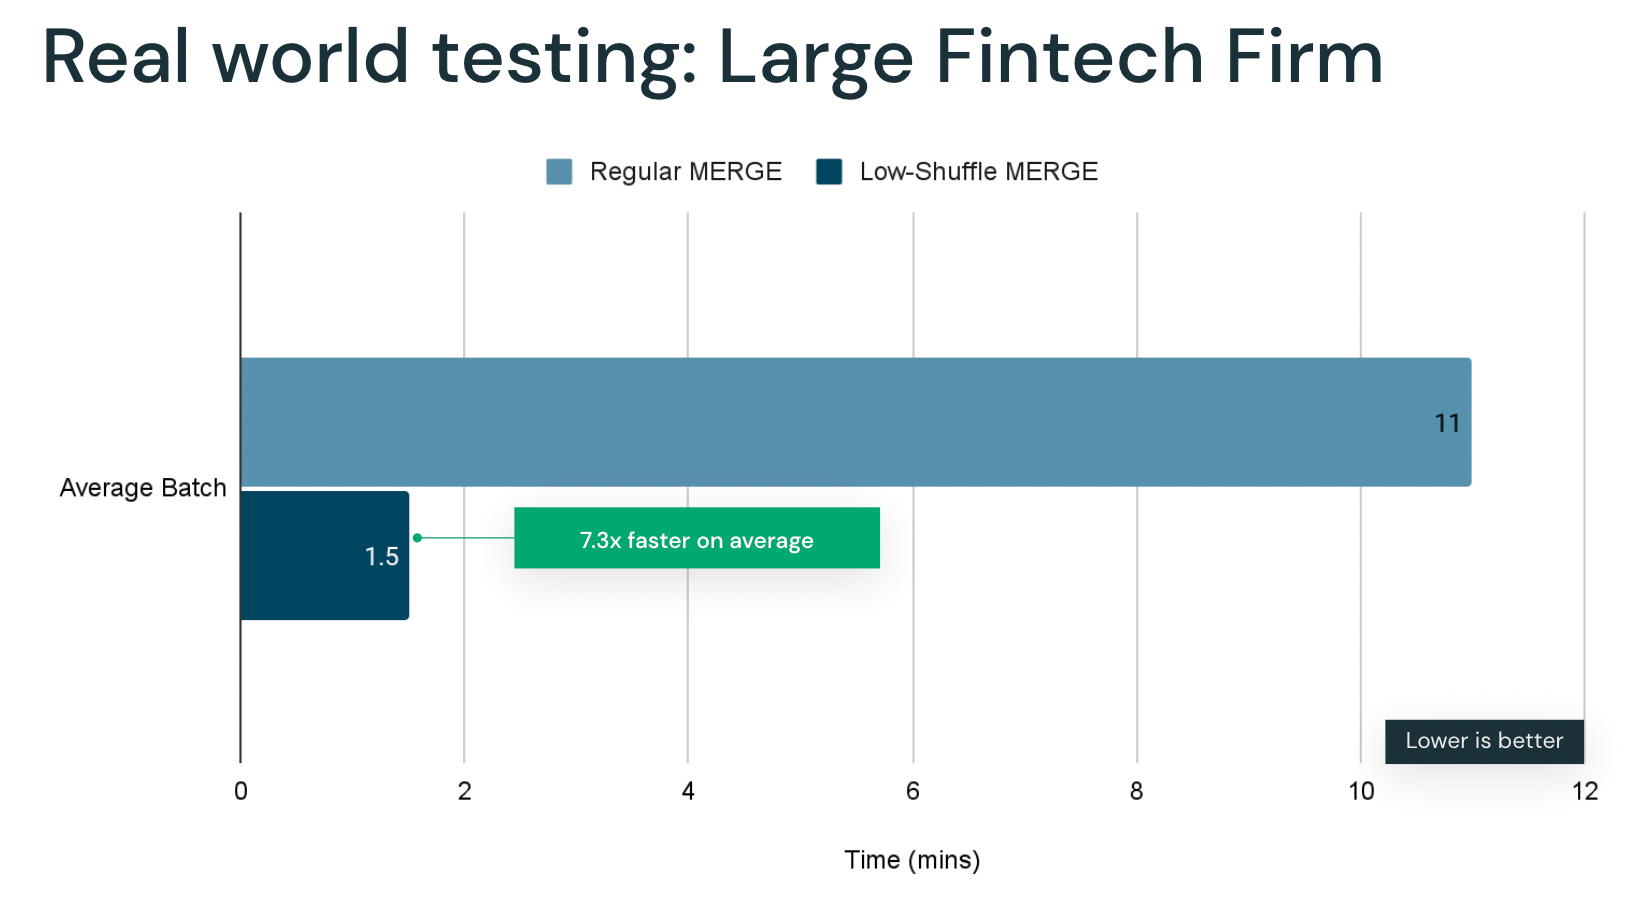 Real world testing: Large Fintech Firm